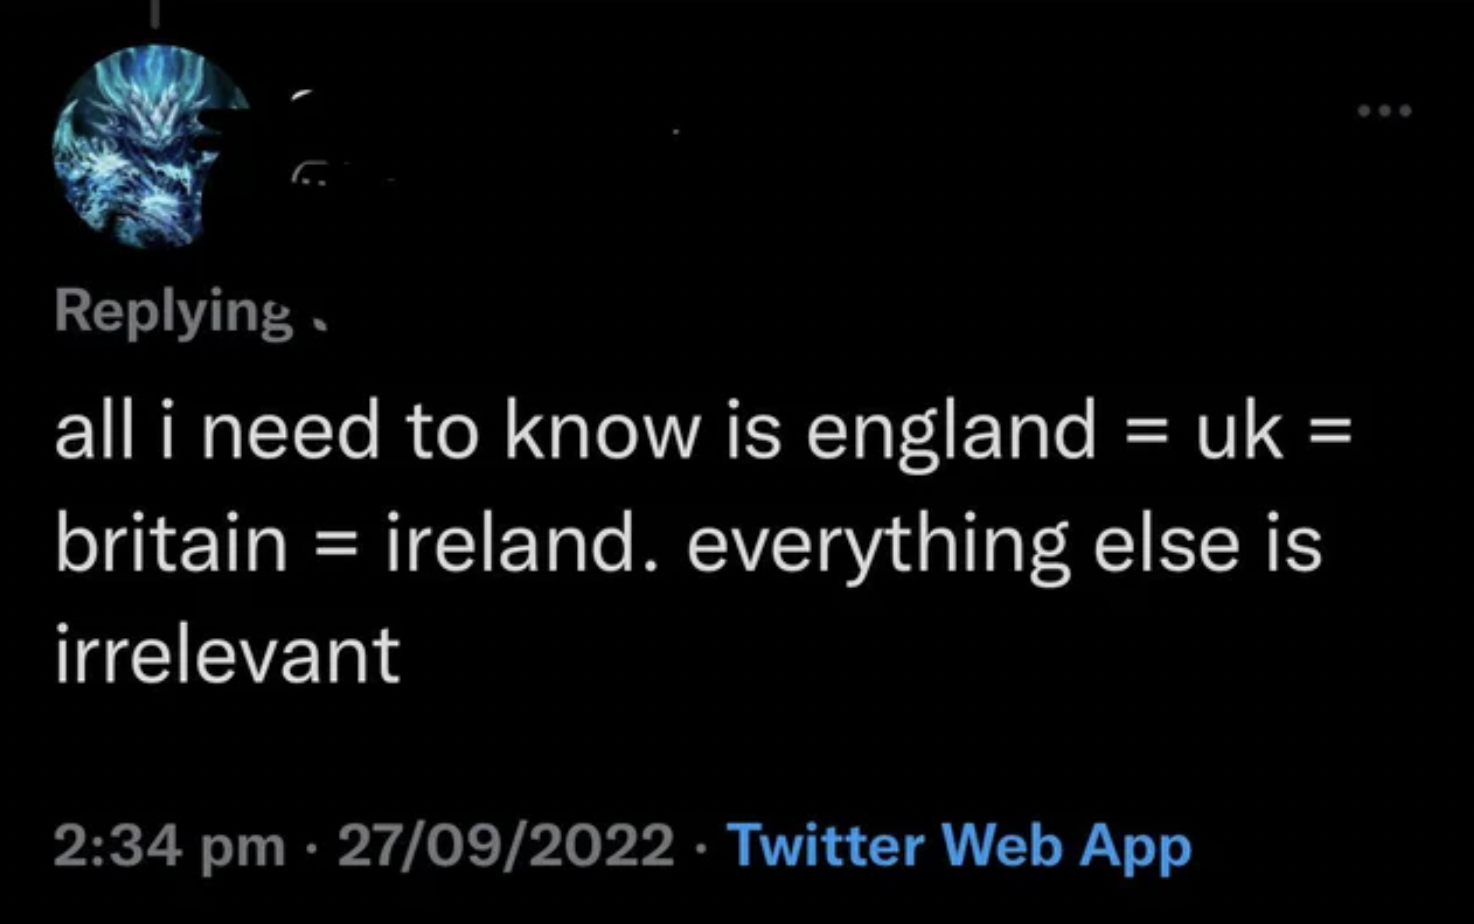 Confidently incorrect people - Internet meme - ing all i need to know is england uk britain ireland. everything else is irrelevant 27092022. Twitter Web App